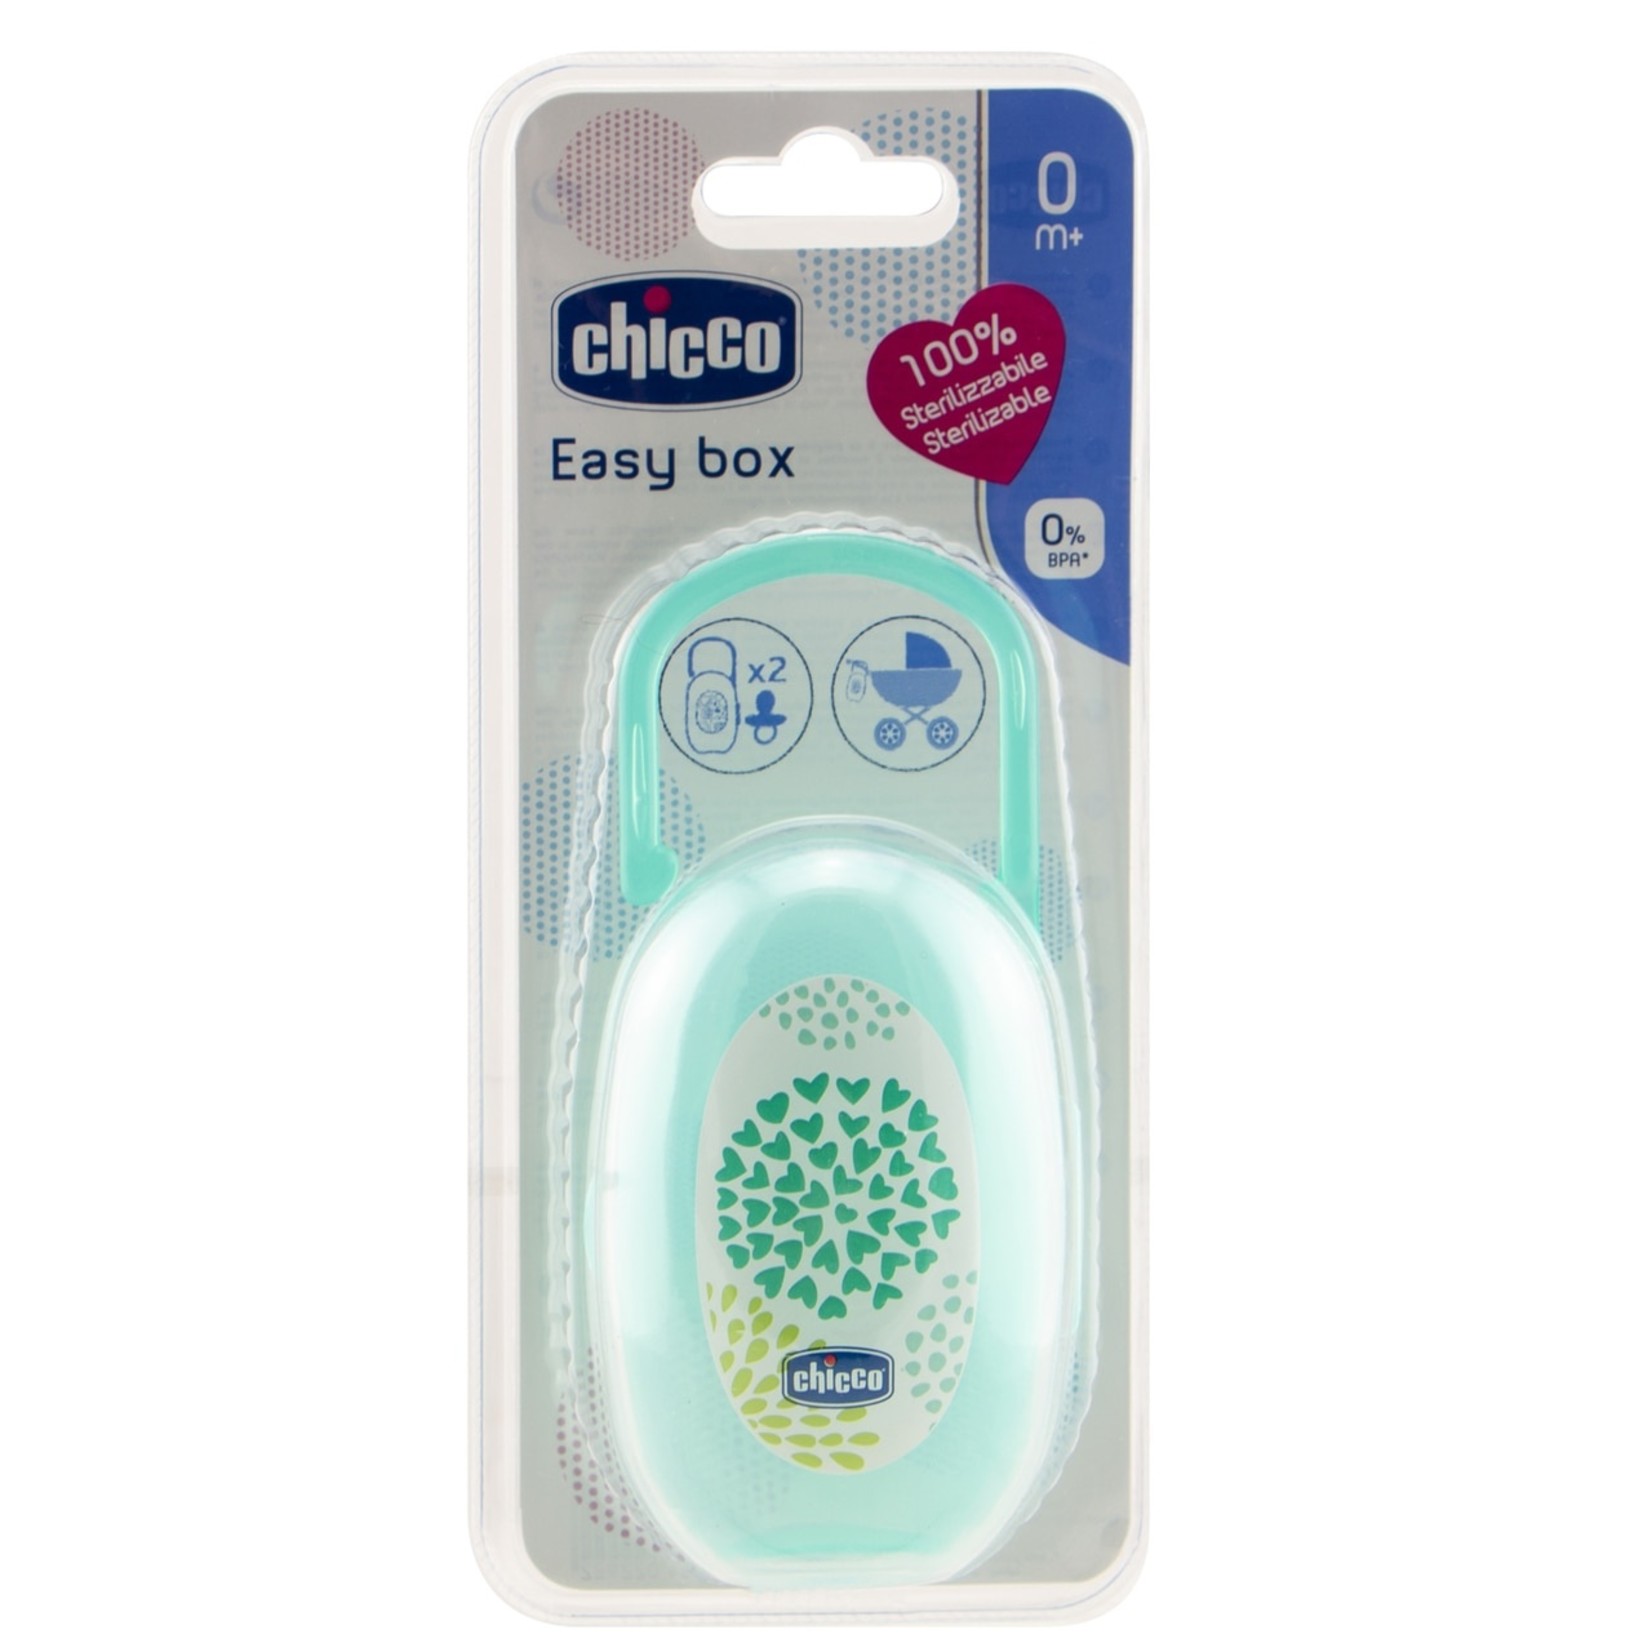 Chicco Neutral Soother Holder